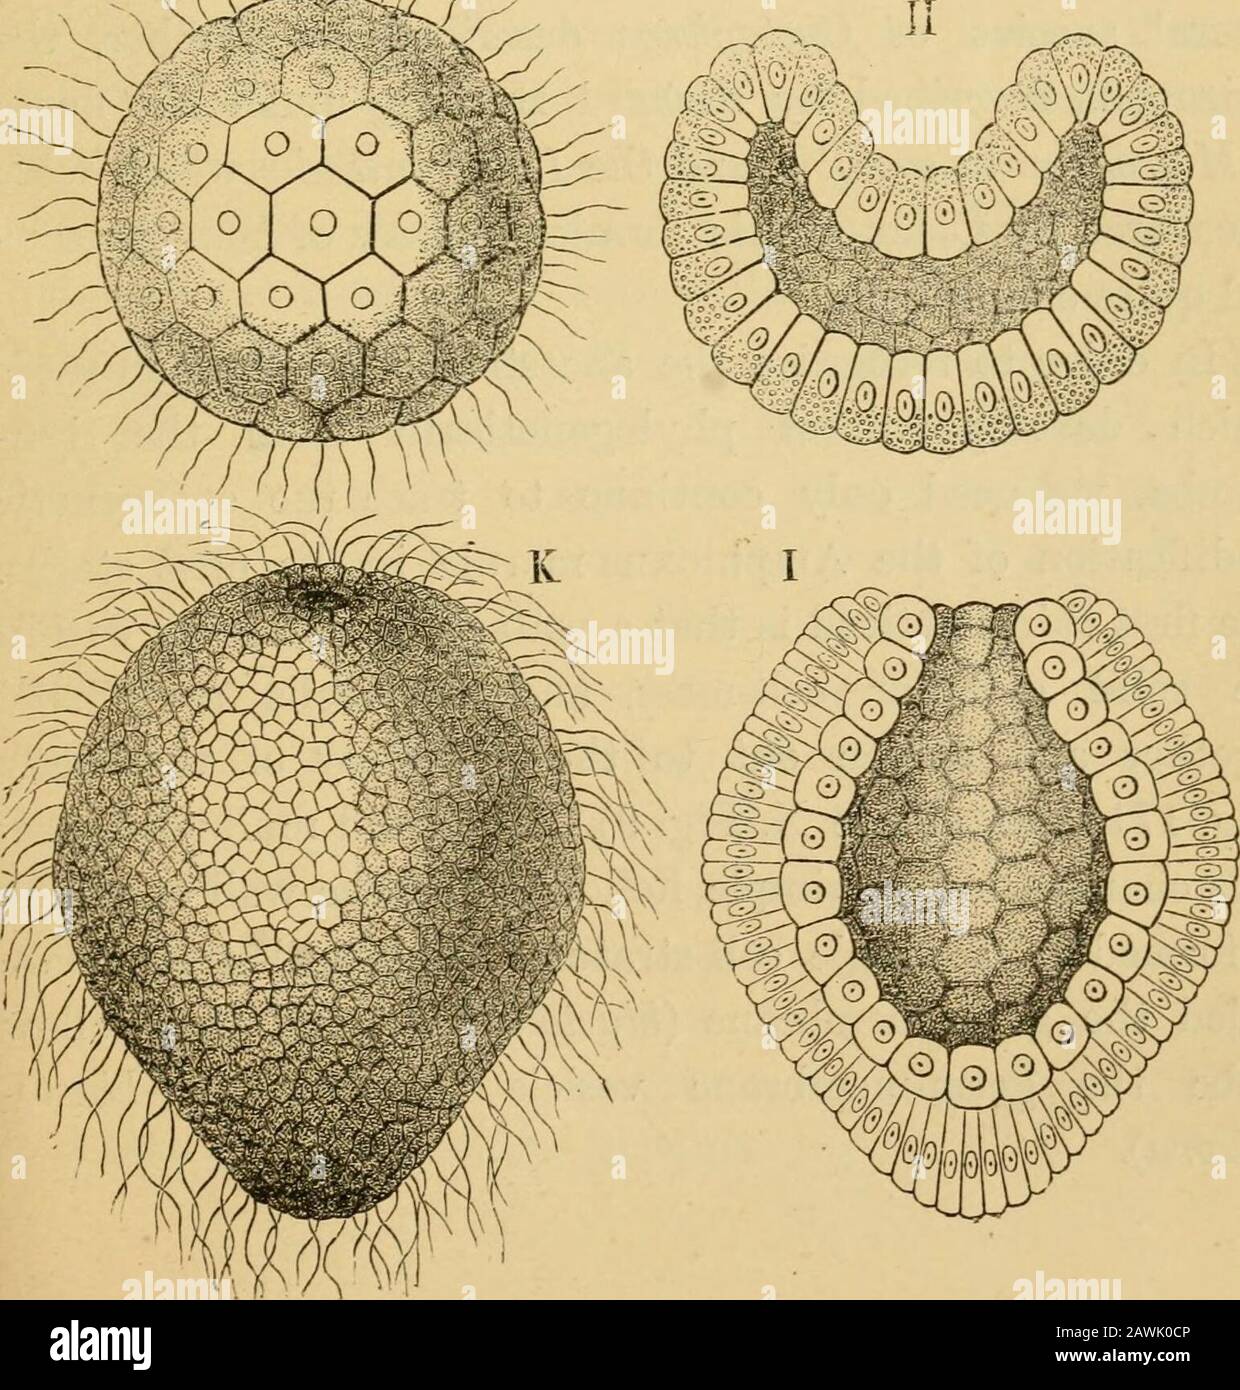 The evolution of man : a popular exposition of the principal points of human ontogeny and phylogeny . &lt;yM^. 58 THE EVOLUTION OF MAN. Fig. 171.—Germination of a coral (Monoxenia Darwinii): A, monerula ;B, parent-cell (cytula); C, two cleavage-cells ; D, four cleavage.cells ; E,mulberry-germ {morula) ; F, vesicular germ (blastula) ; G, vesicular germin section; H, infolded vesicular germ in section ; I, gastrula in longitu-dinal section; K, gastrula, or cup-germ, seen from the outside. kindred cells which originated through division remainedunited. The advantages which these first cell-societ Stock Photo